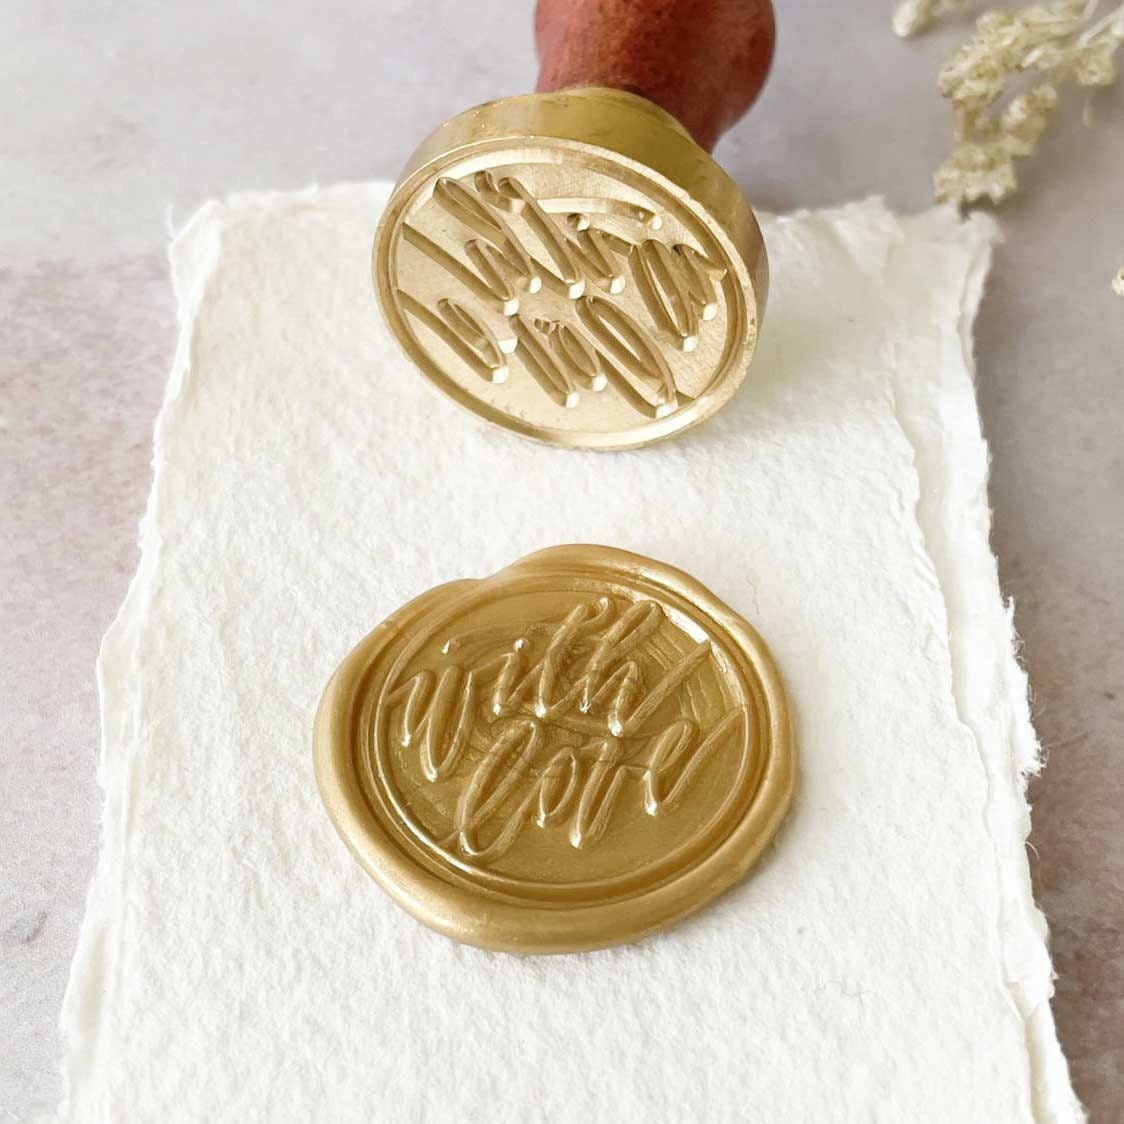 Wax Seal Stamp Set, Luxury Gift Set Box, DIY Letters and Invitations 